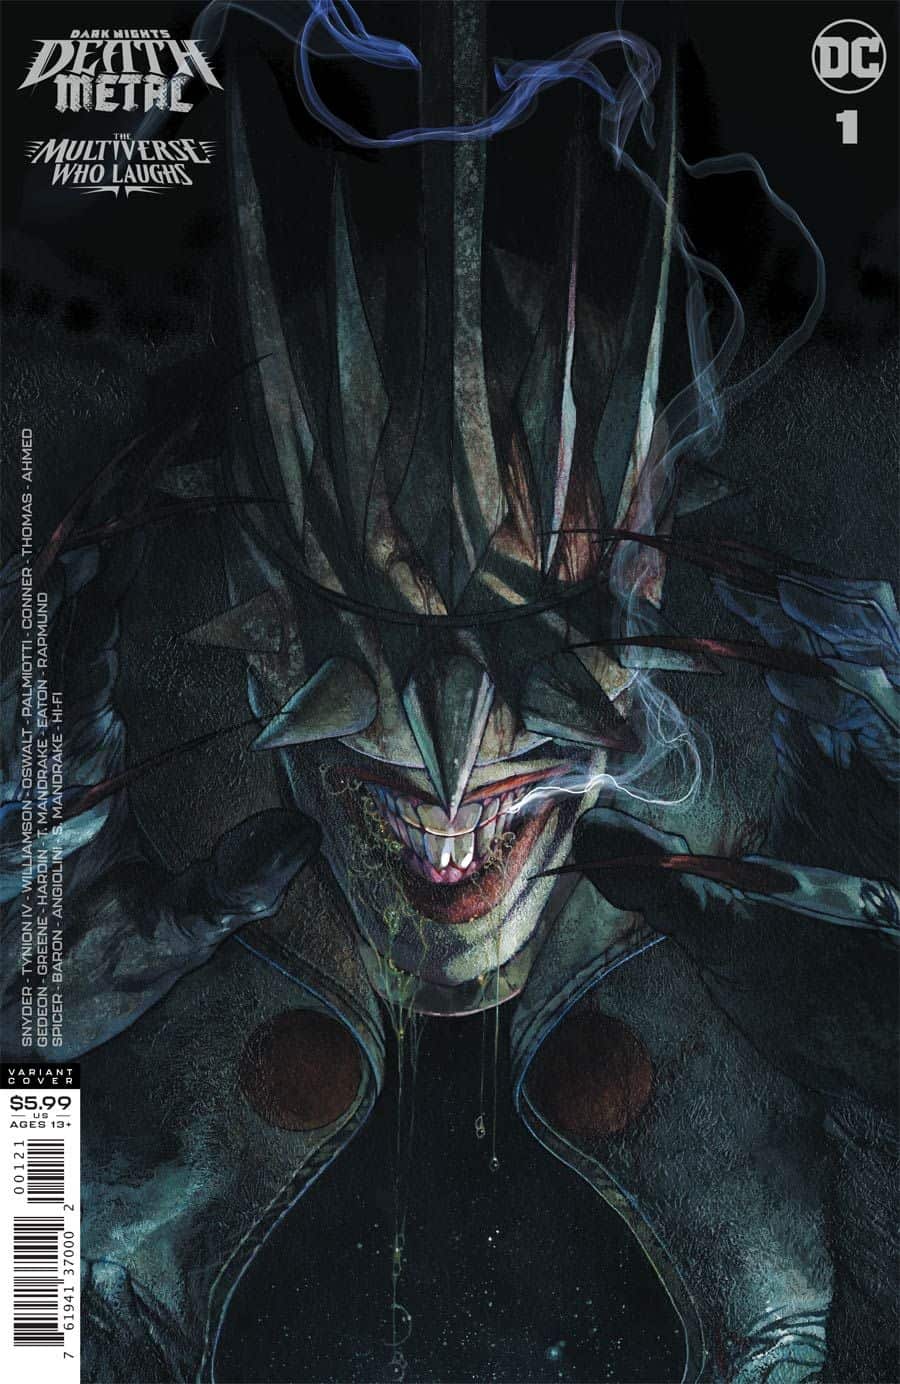 DC Comics & Dark Nights: Death Metal: The Multiverse Who Laughs #1 Spoilers  & Review: Robin King Hosts Batman Who Laughs Take On Superman: Red Son &  More! – Inside Pulse